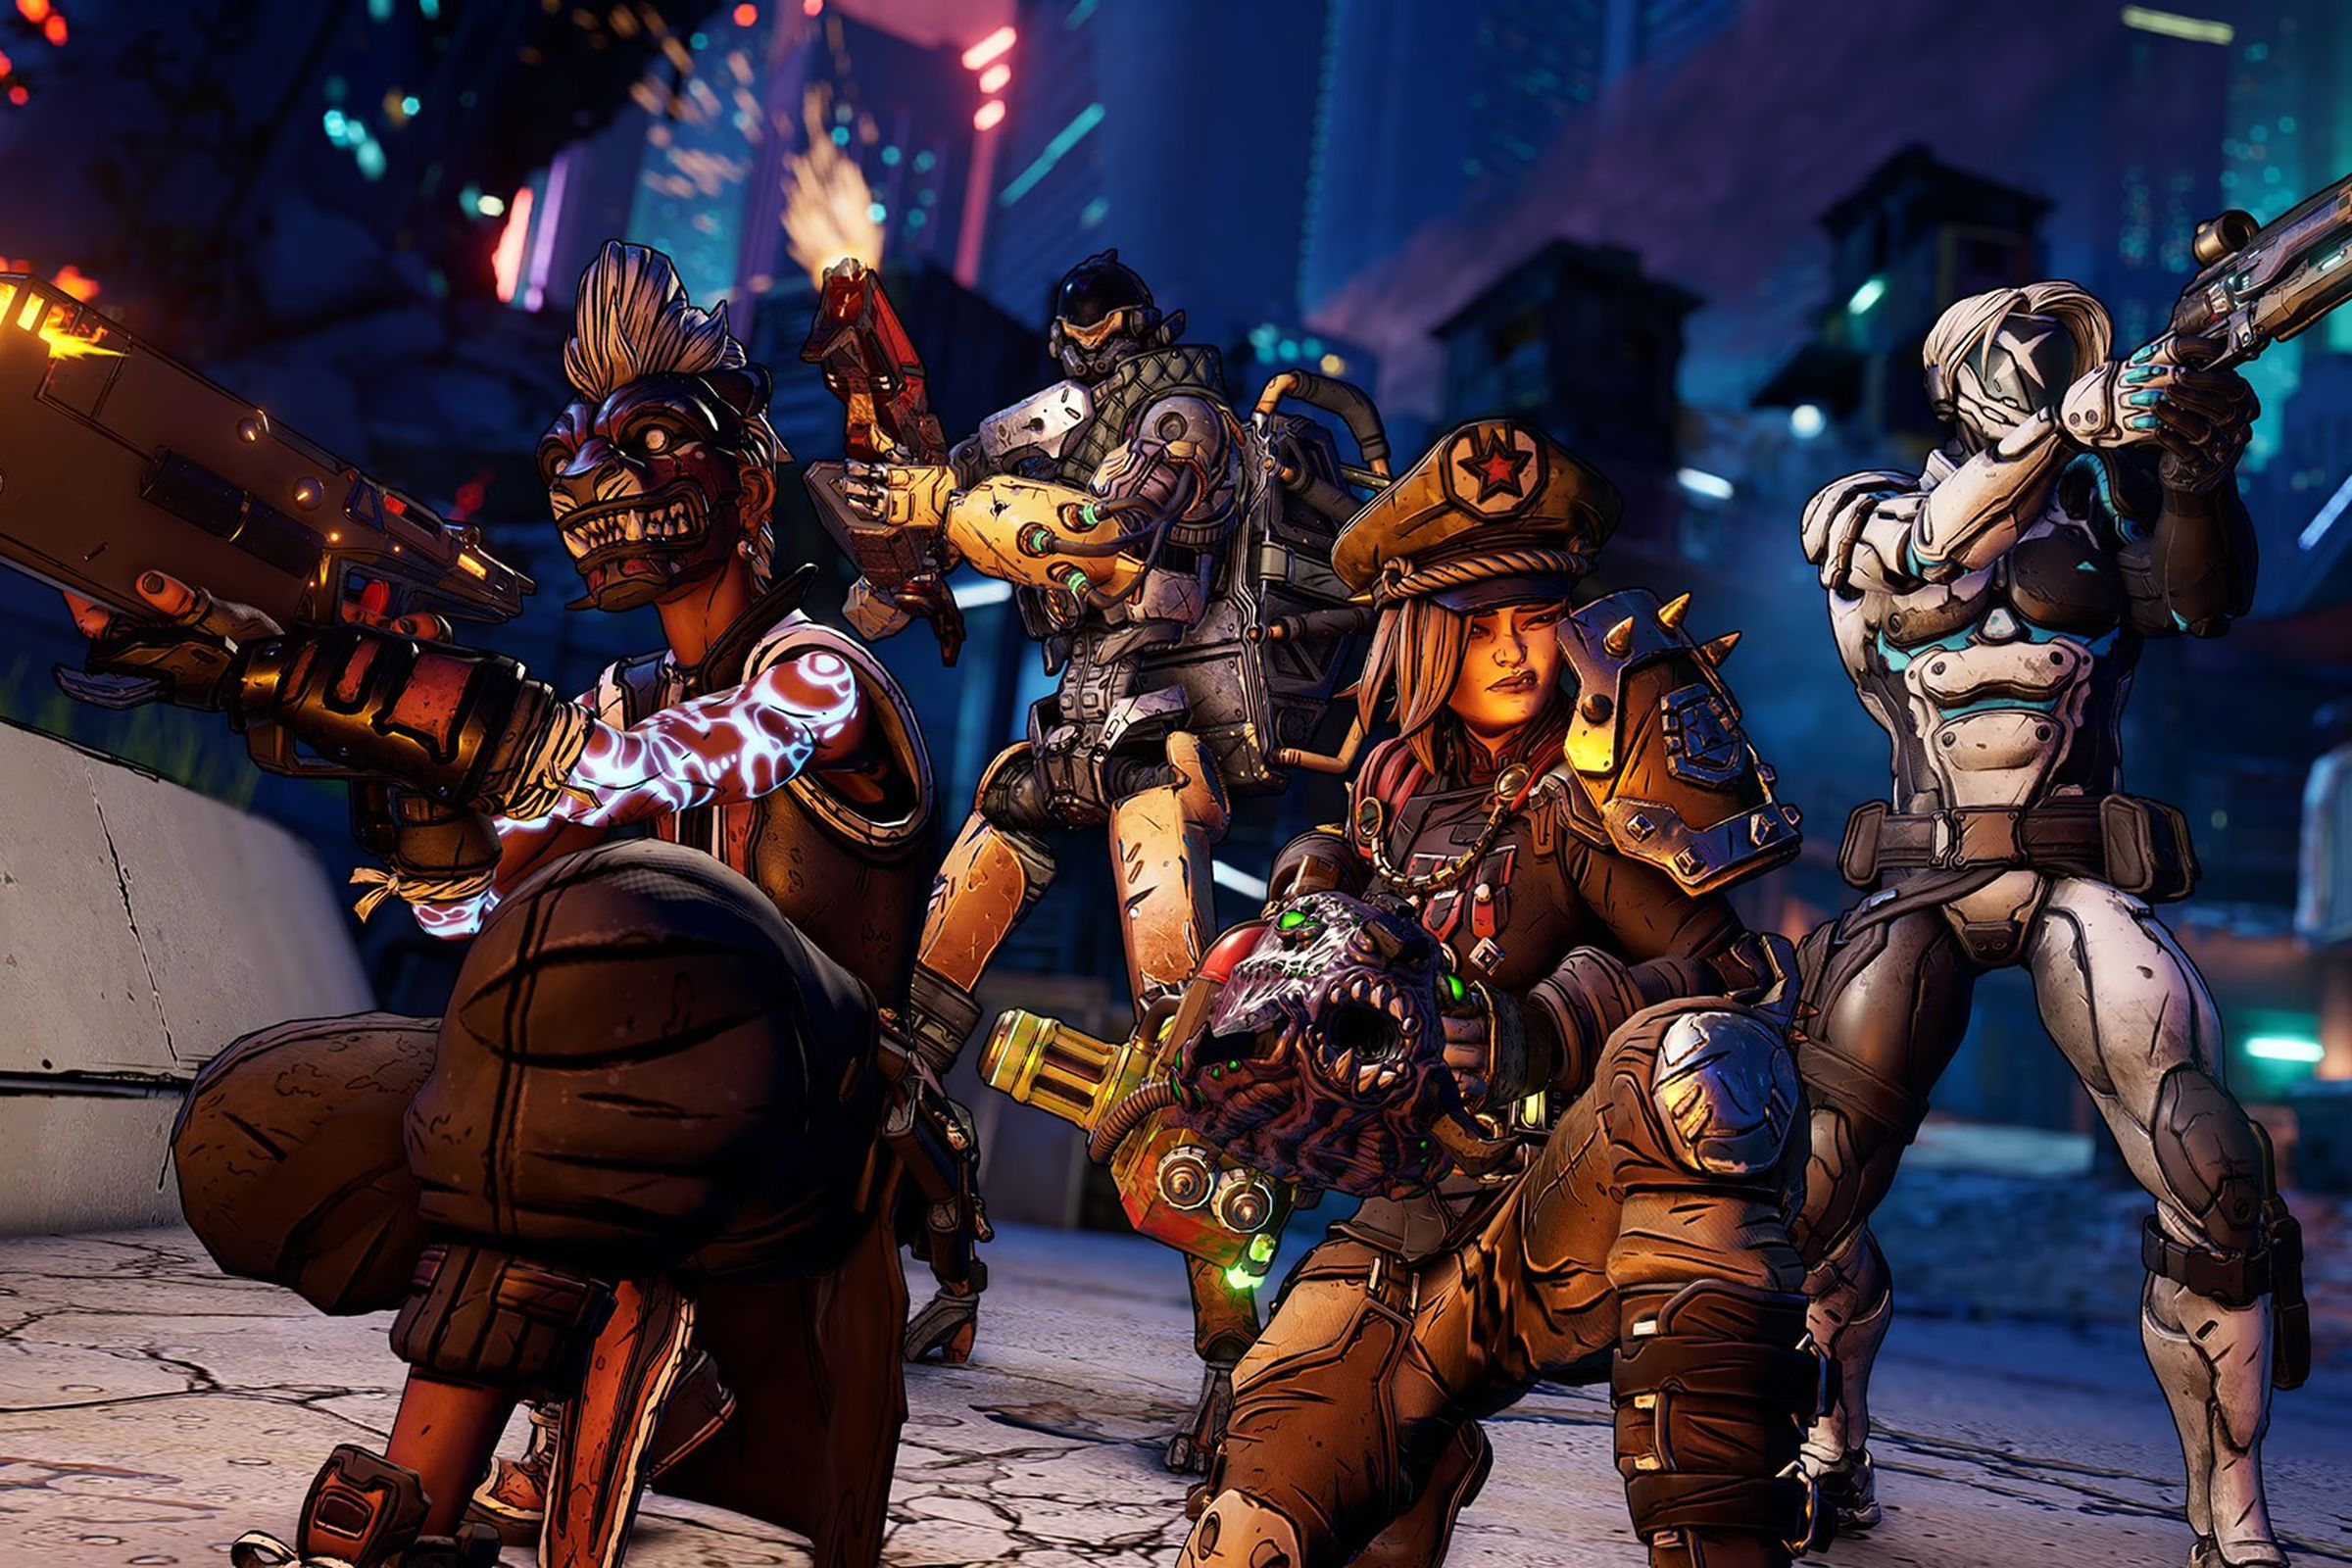 A screenshot from the game Borderlands 3, showing four gun-toting characters looking tough.